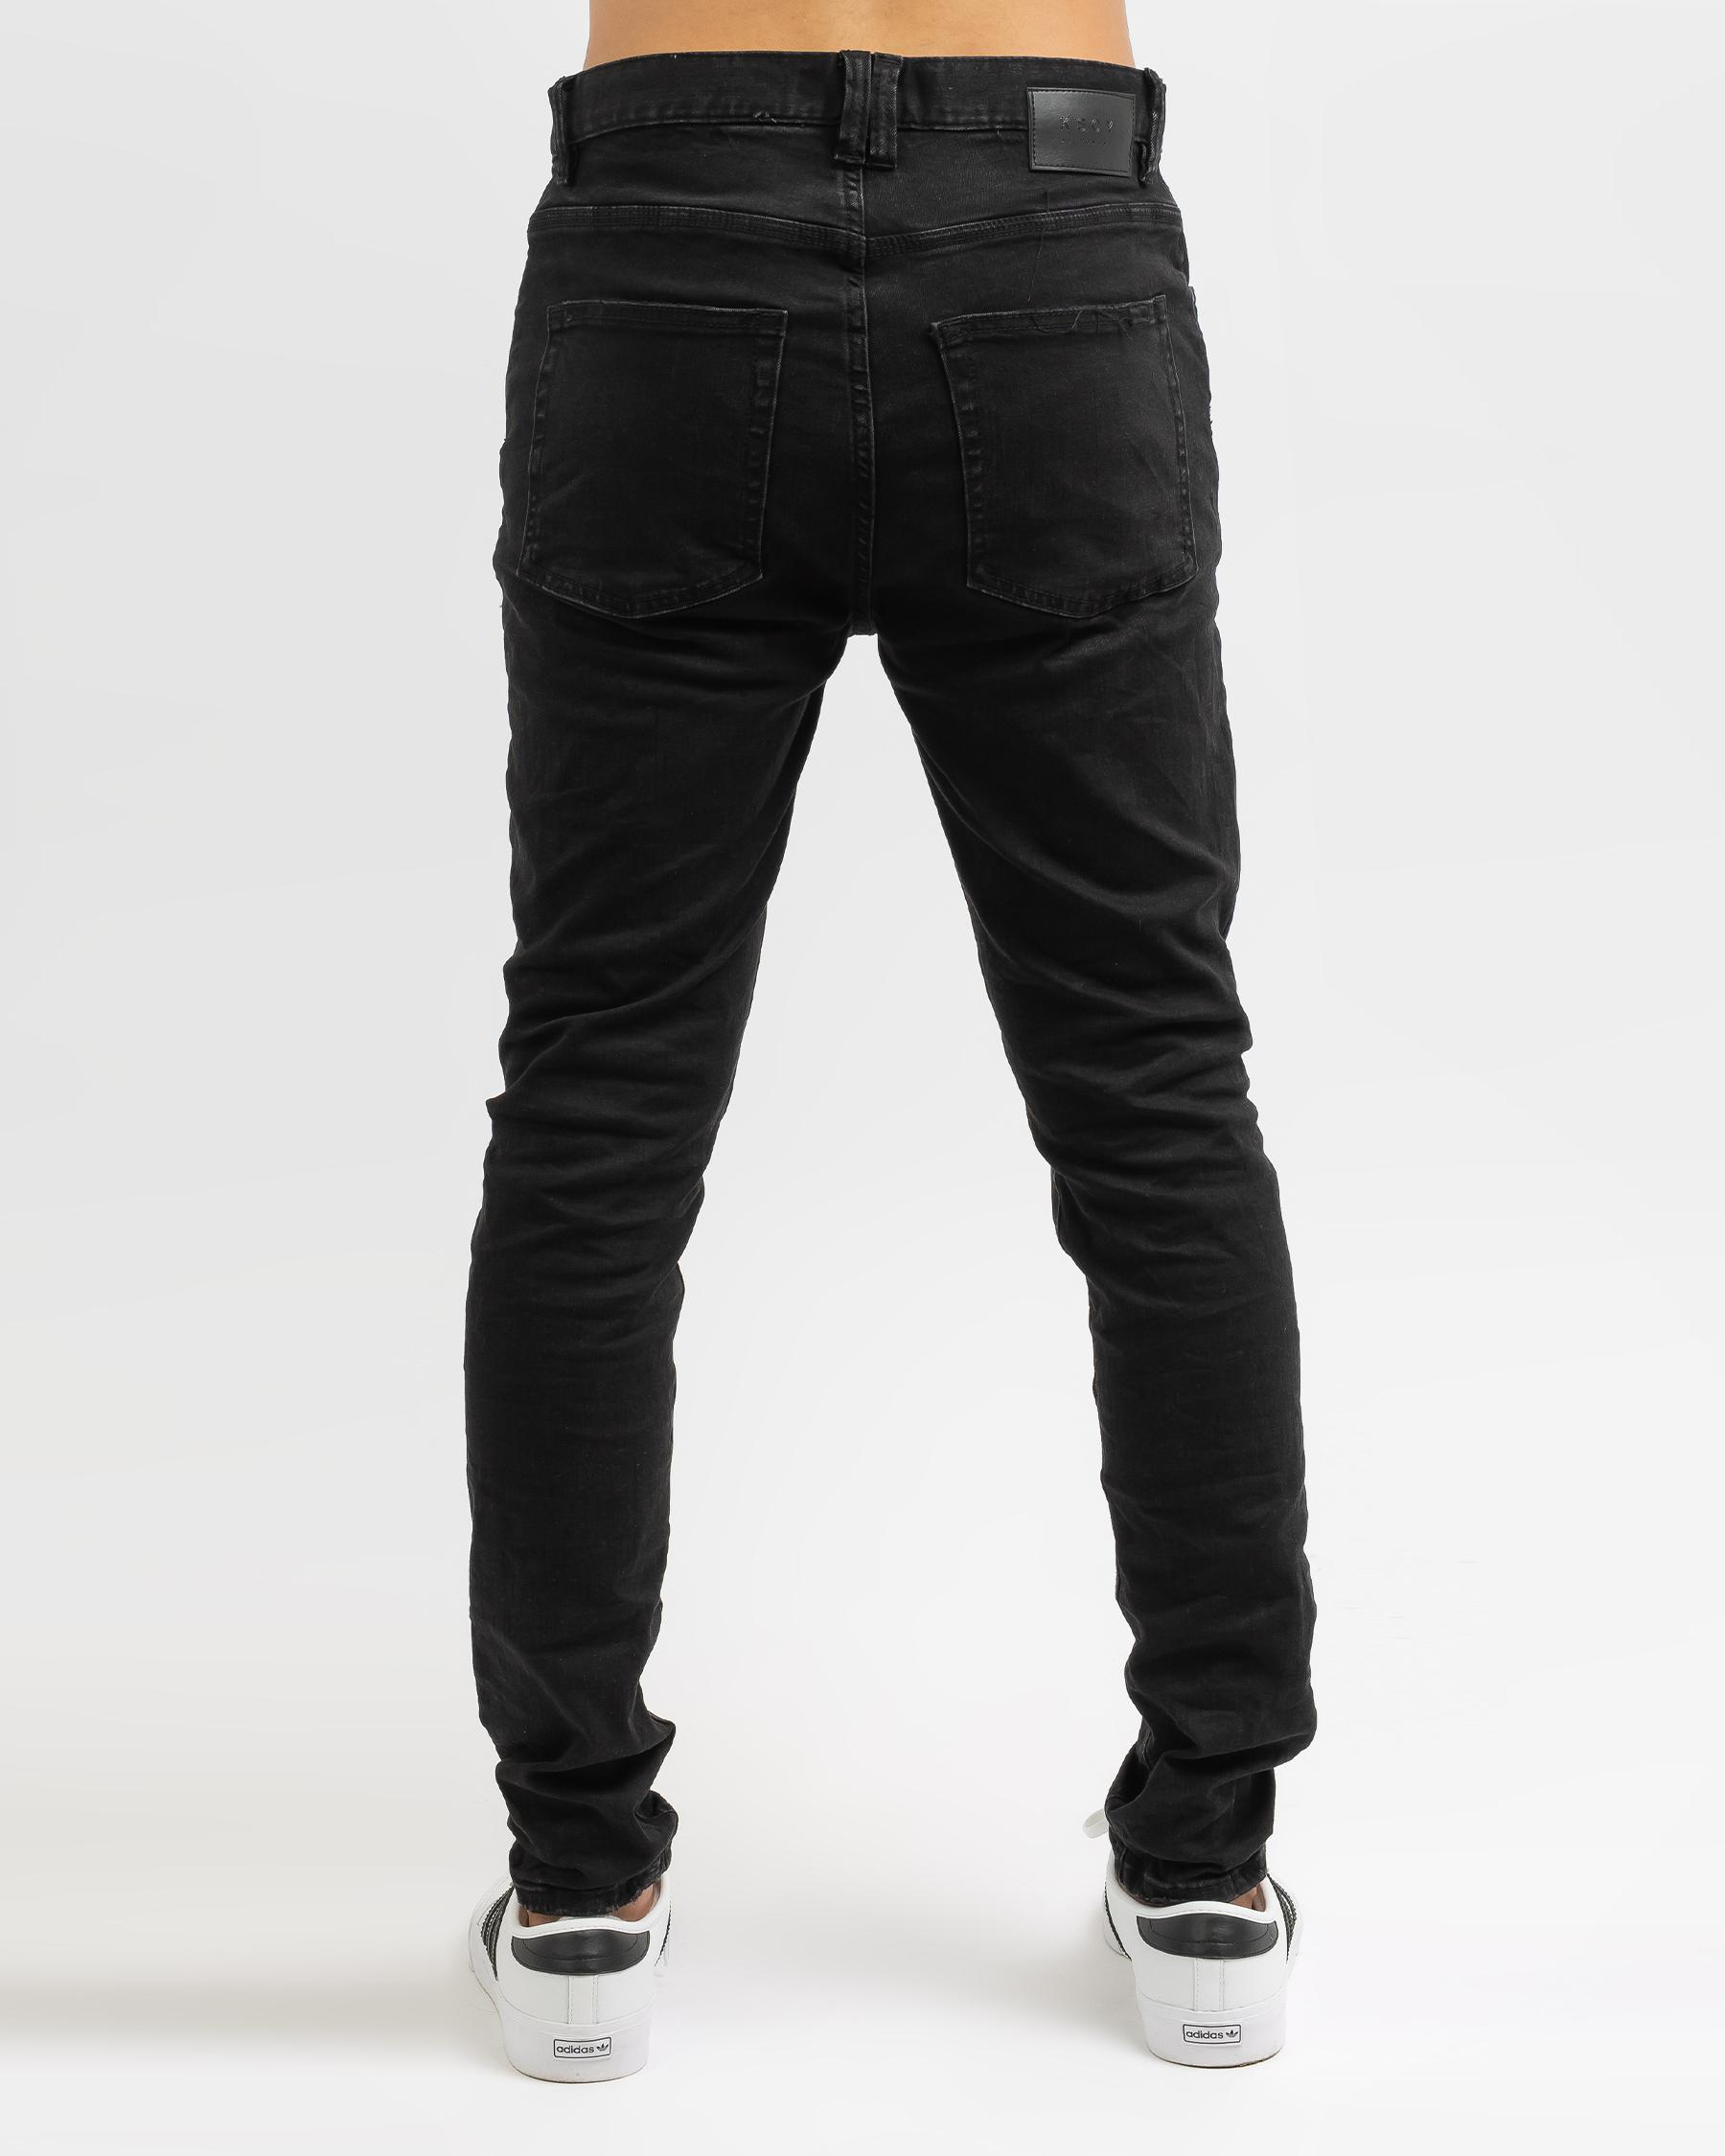 Kiss Chacey K1 Super Skinny Jeans In Destroyed Washed Black - Fast ...